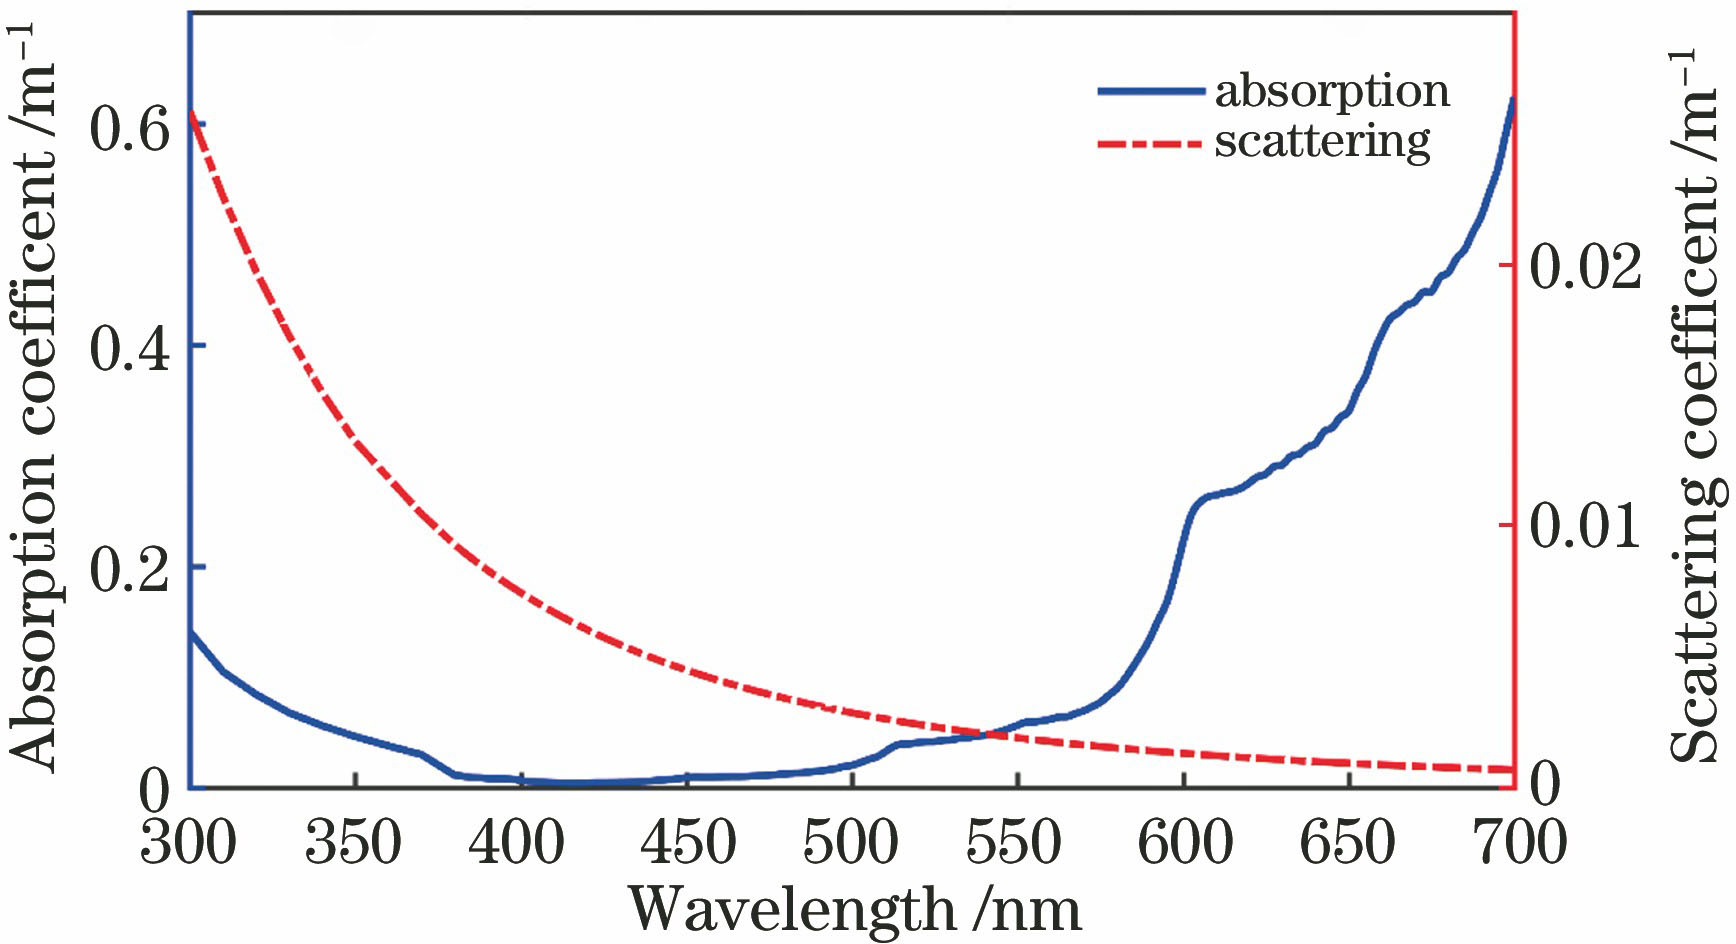 Absorption and scattering coefficients of pure water